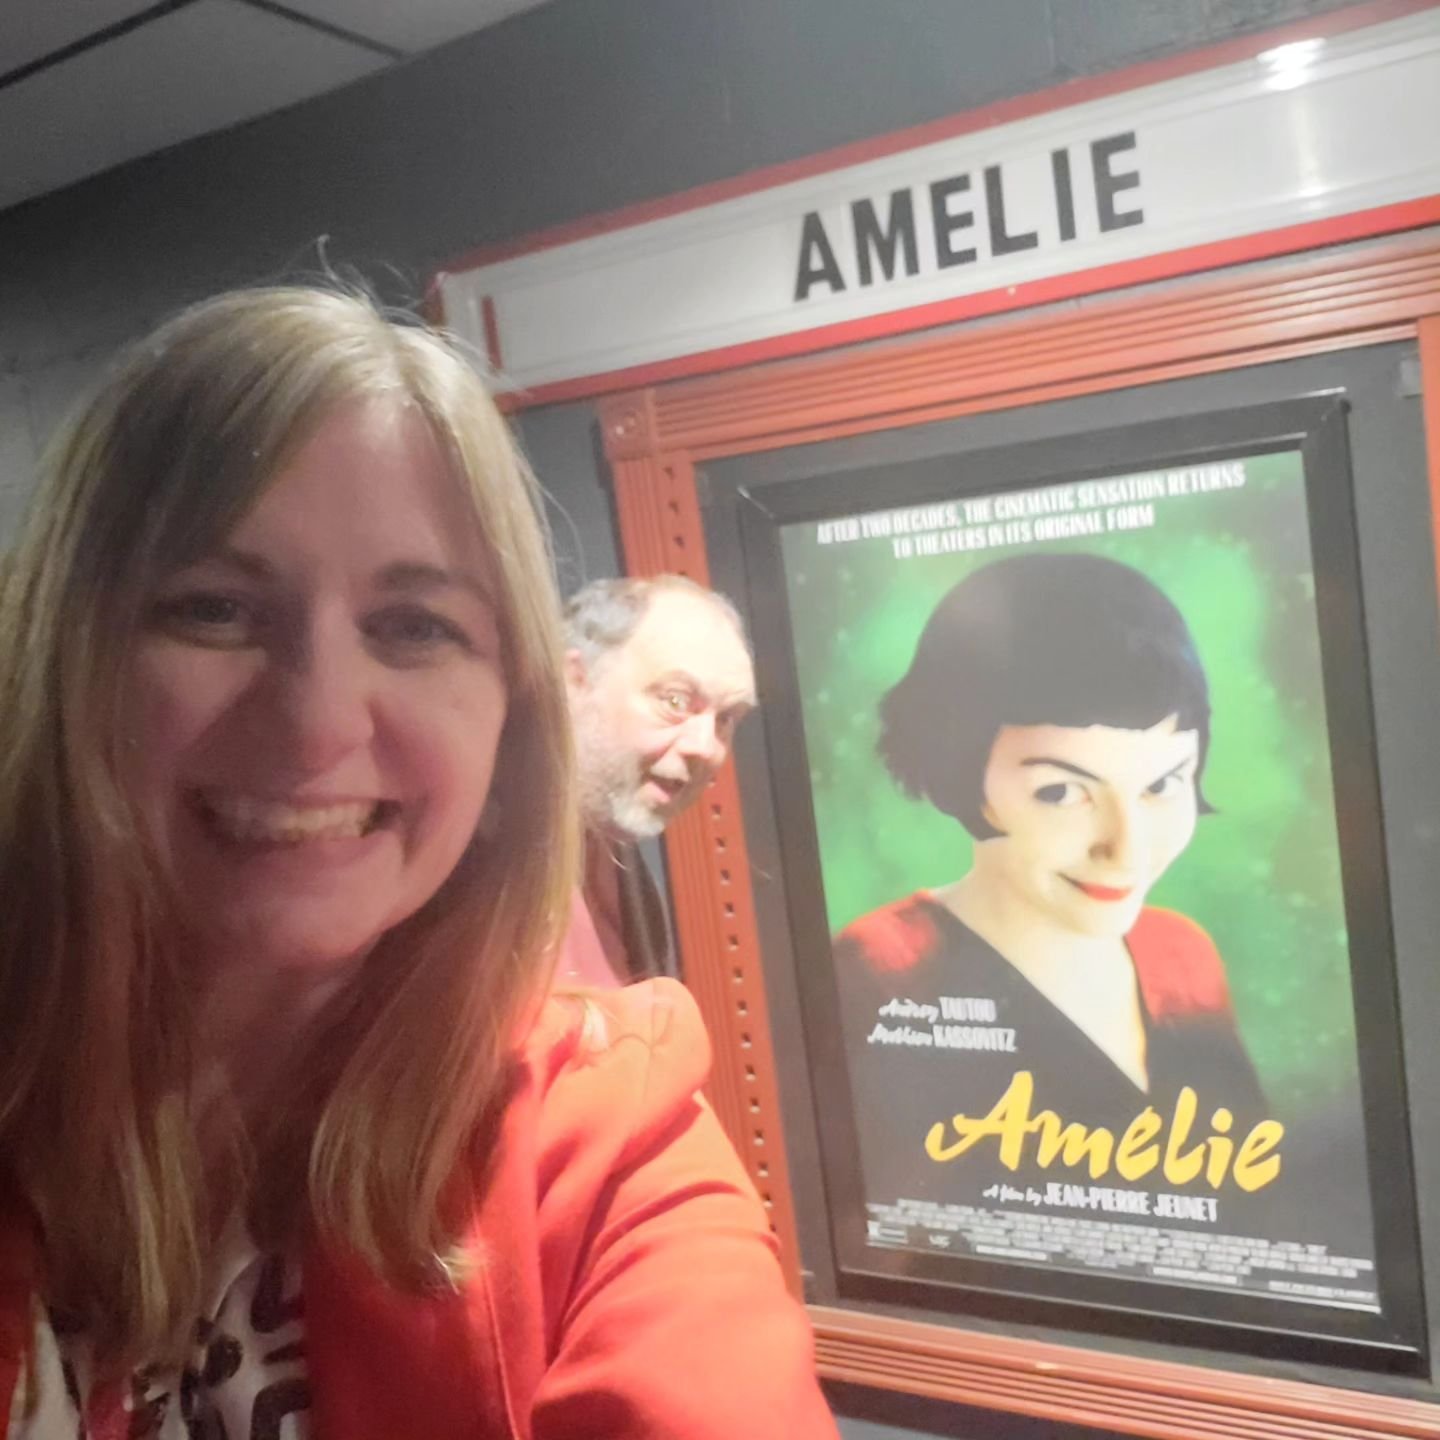 Welcome back @spectrumtheatre ! 🎬
.
We had so much fun watching Amelie on the big screen last night to celebrate the re- opening of the Spectrum.  We've always loved this spot, so much so that it was the site of our publicity photos from 2015's Lone